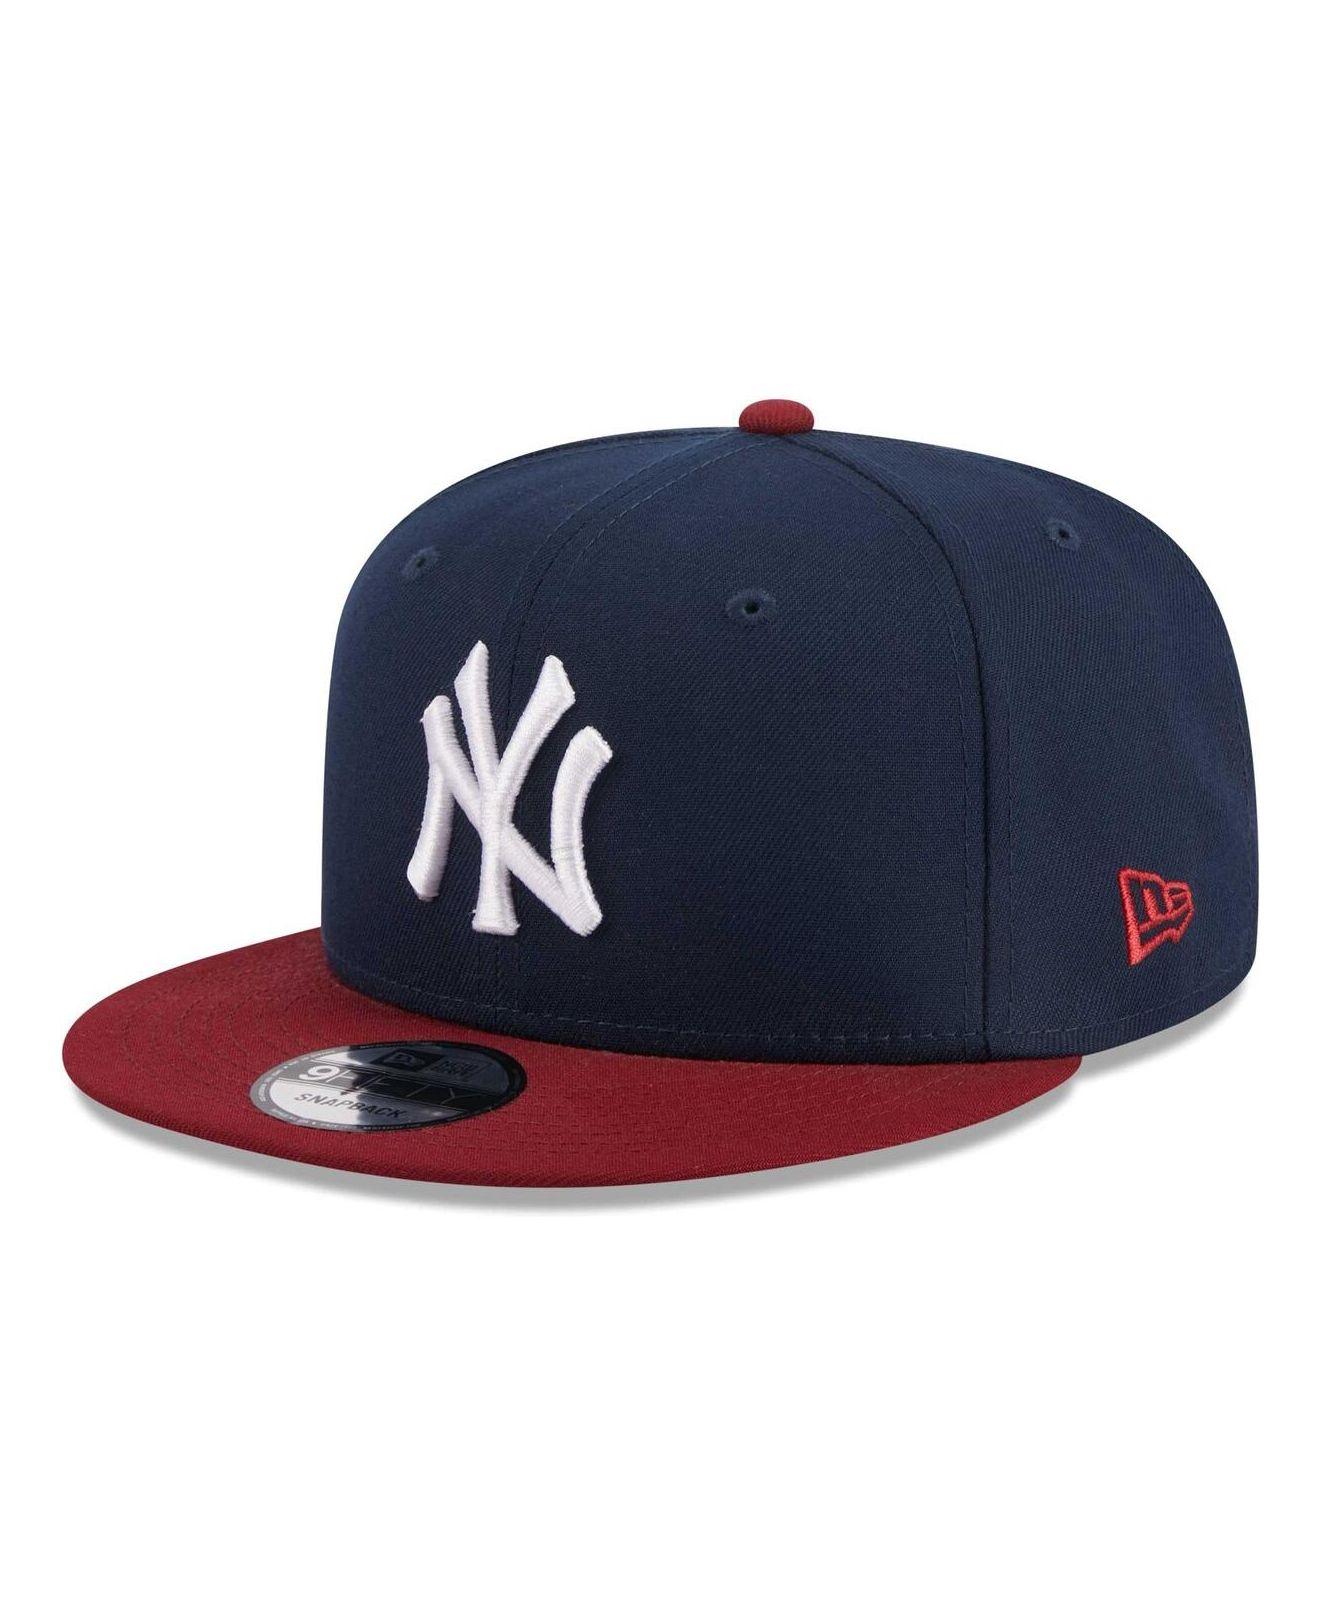 New York Yankees Mitchell & Ness Bases Loaded Fitted Hat - Navy/Gray